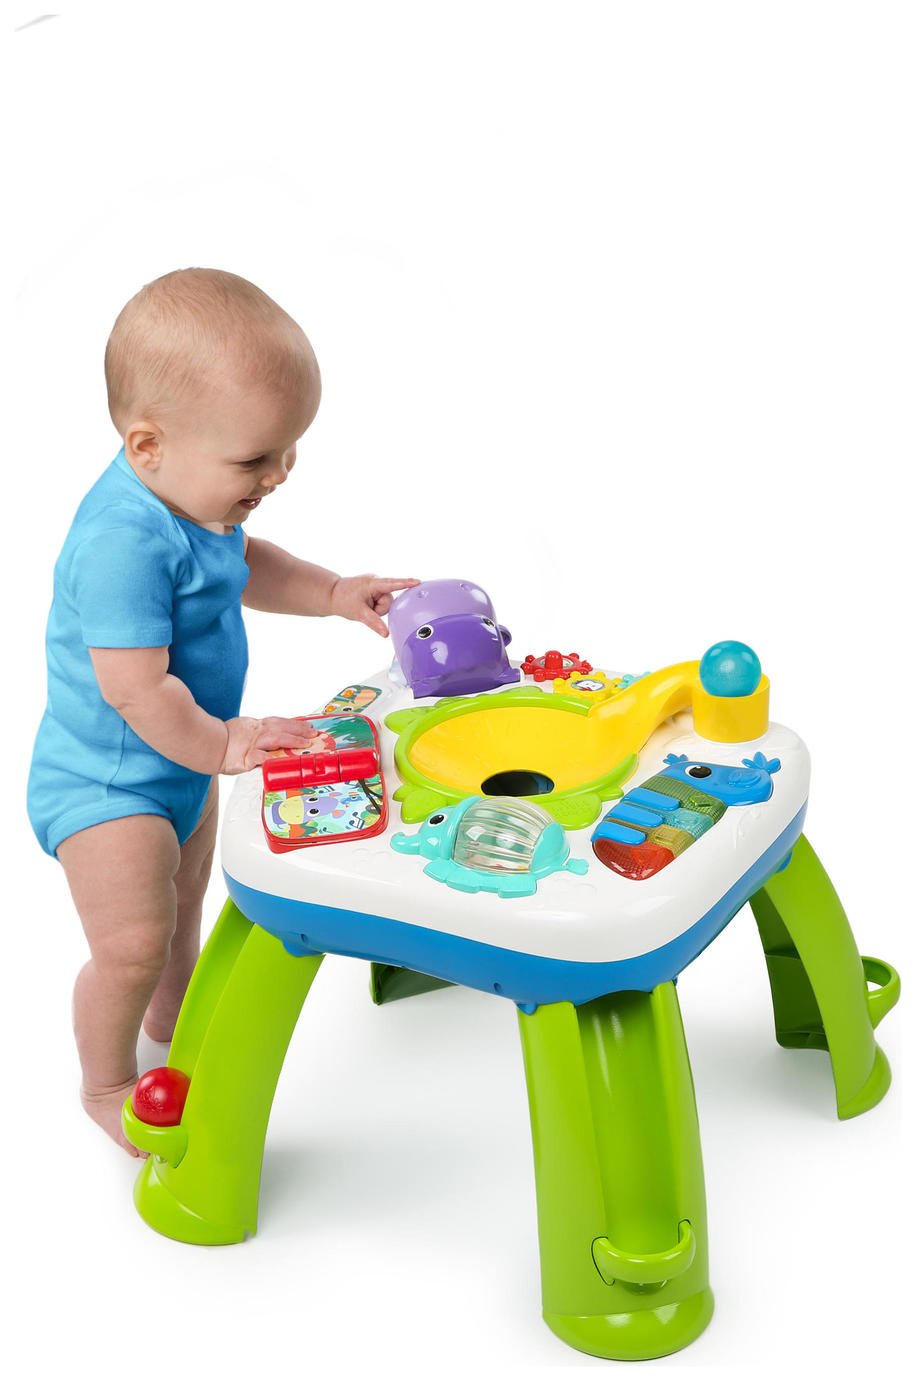 bright starts activity table with seat